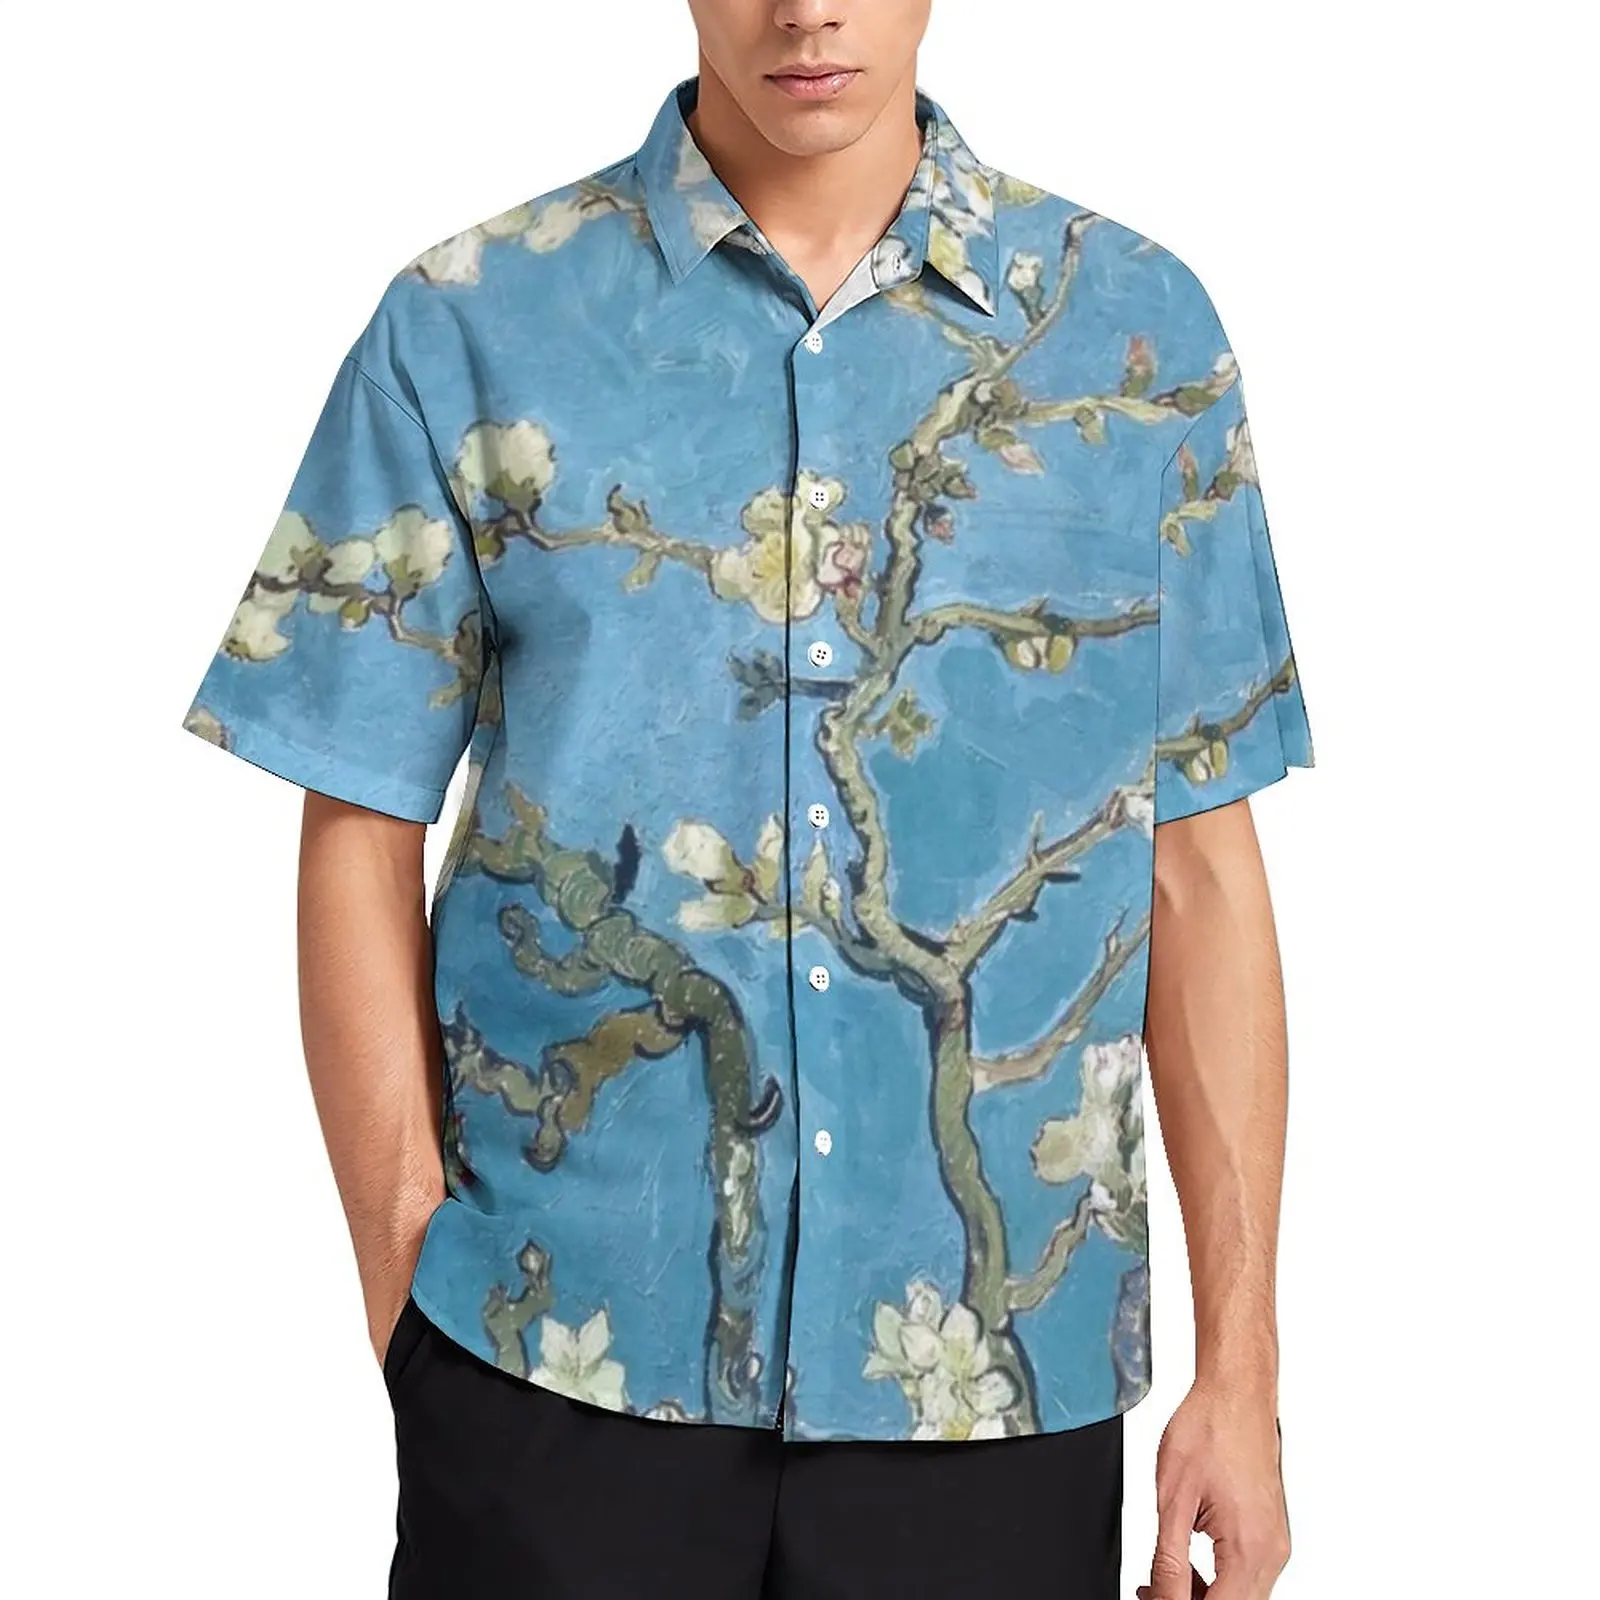 

Branches with Almond Blossom Beach Shirt Vincent Van Gogh Hawaiian Casual Shirts Male Vintage Blouses Short-Sleeve Graphic Tops